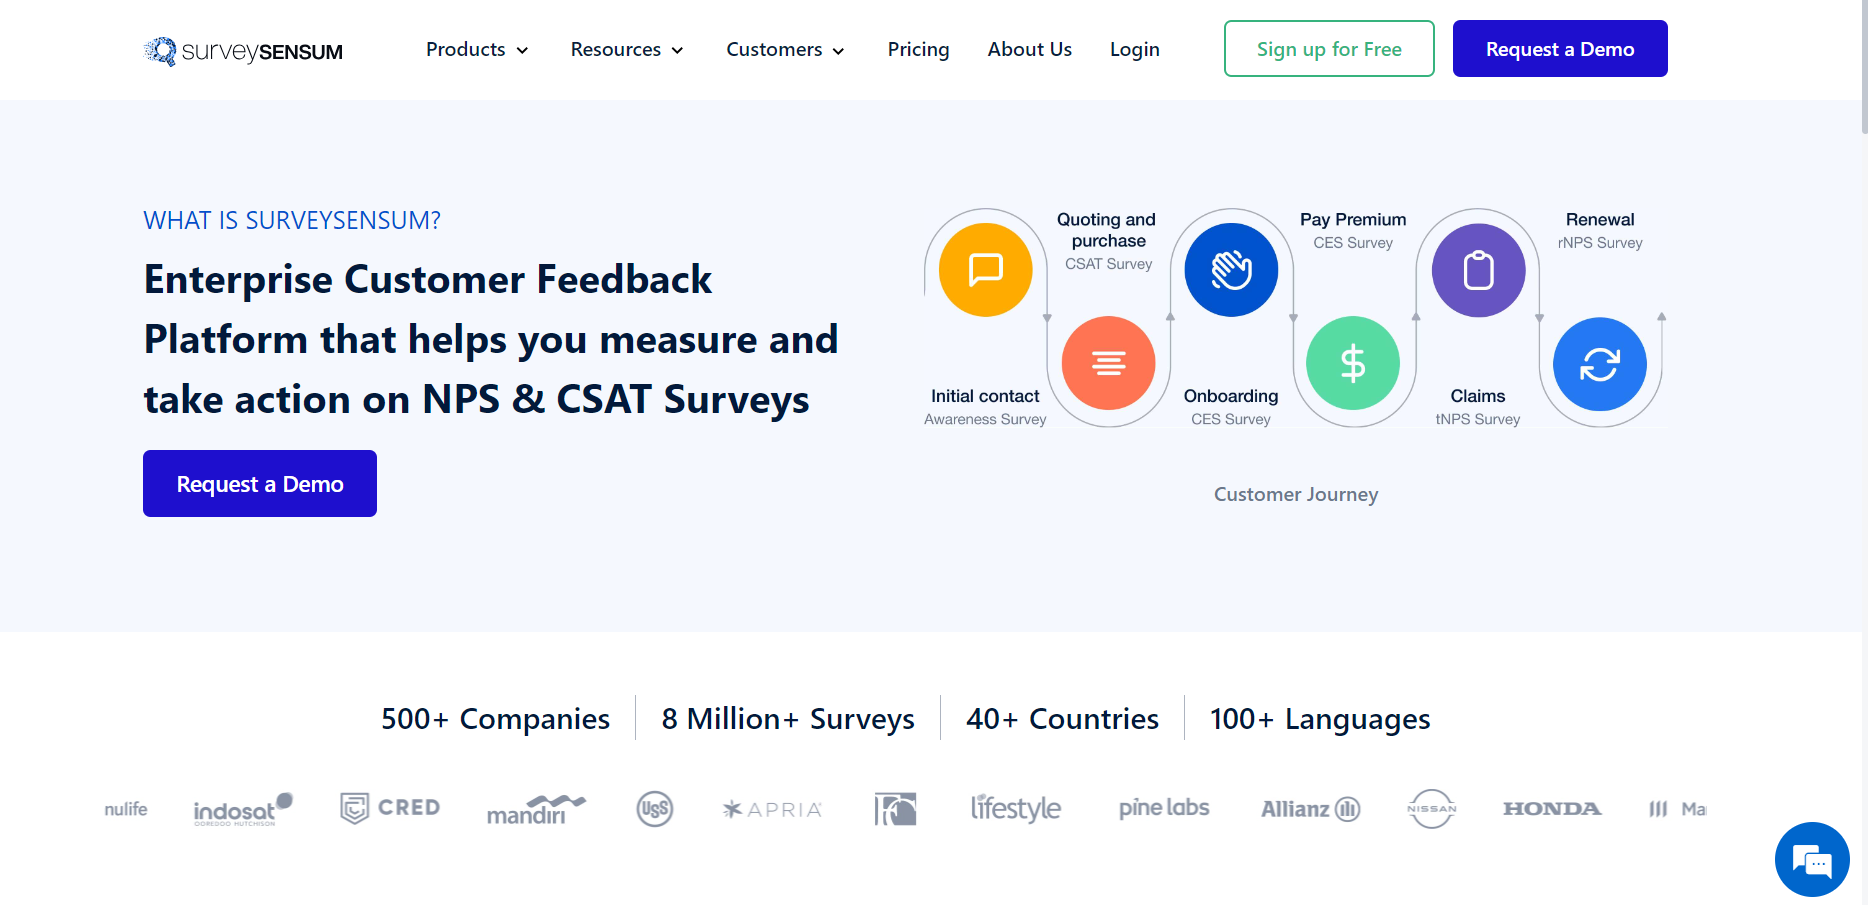 the image shows the home page of SurveySensum- one of the market research tools for startups and AI market research tools.